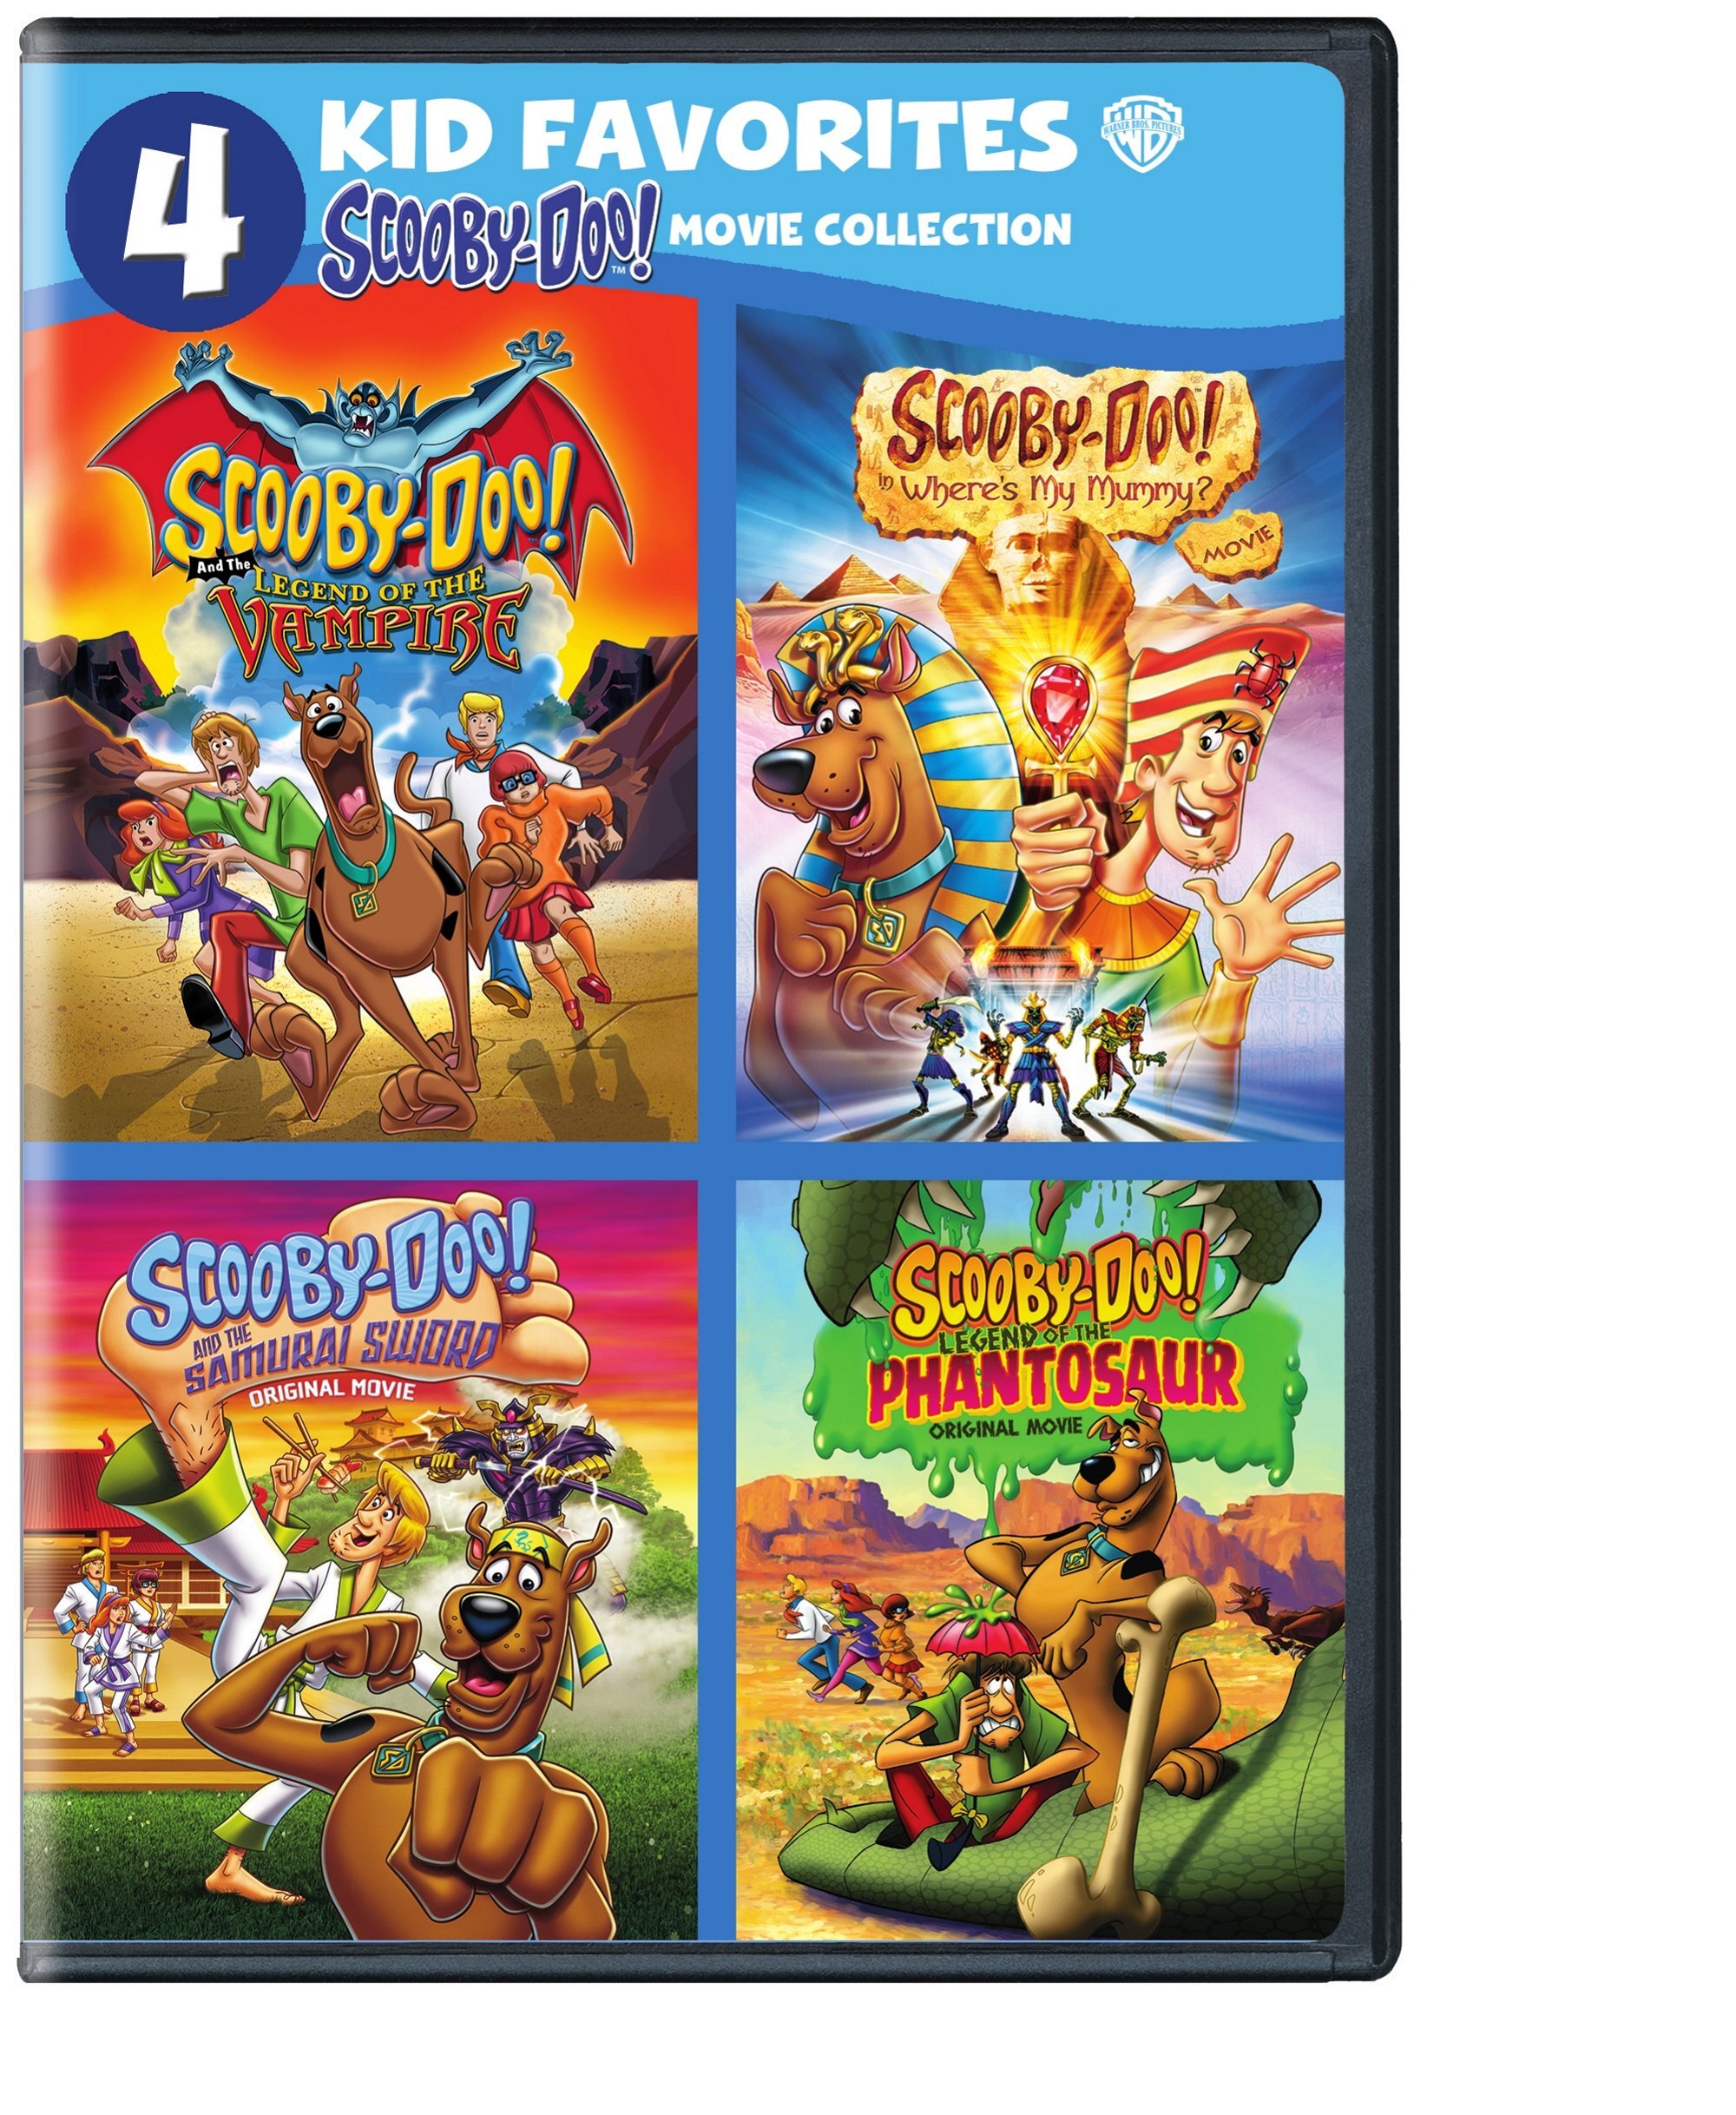 Scooby-Doo: 4 Movie Collection (Box Set) - DVD   - Children Movies On DVD - Movies On GRUV